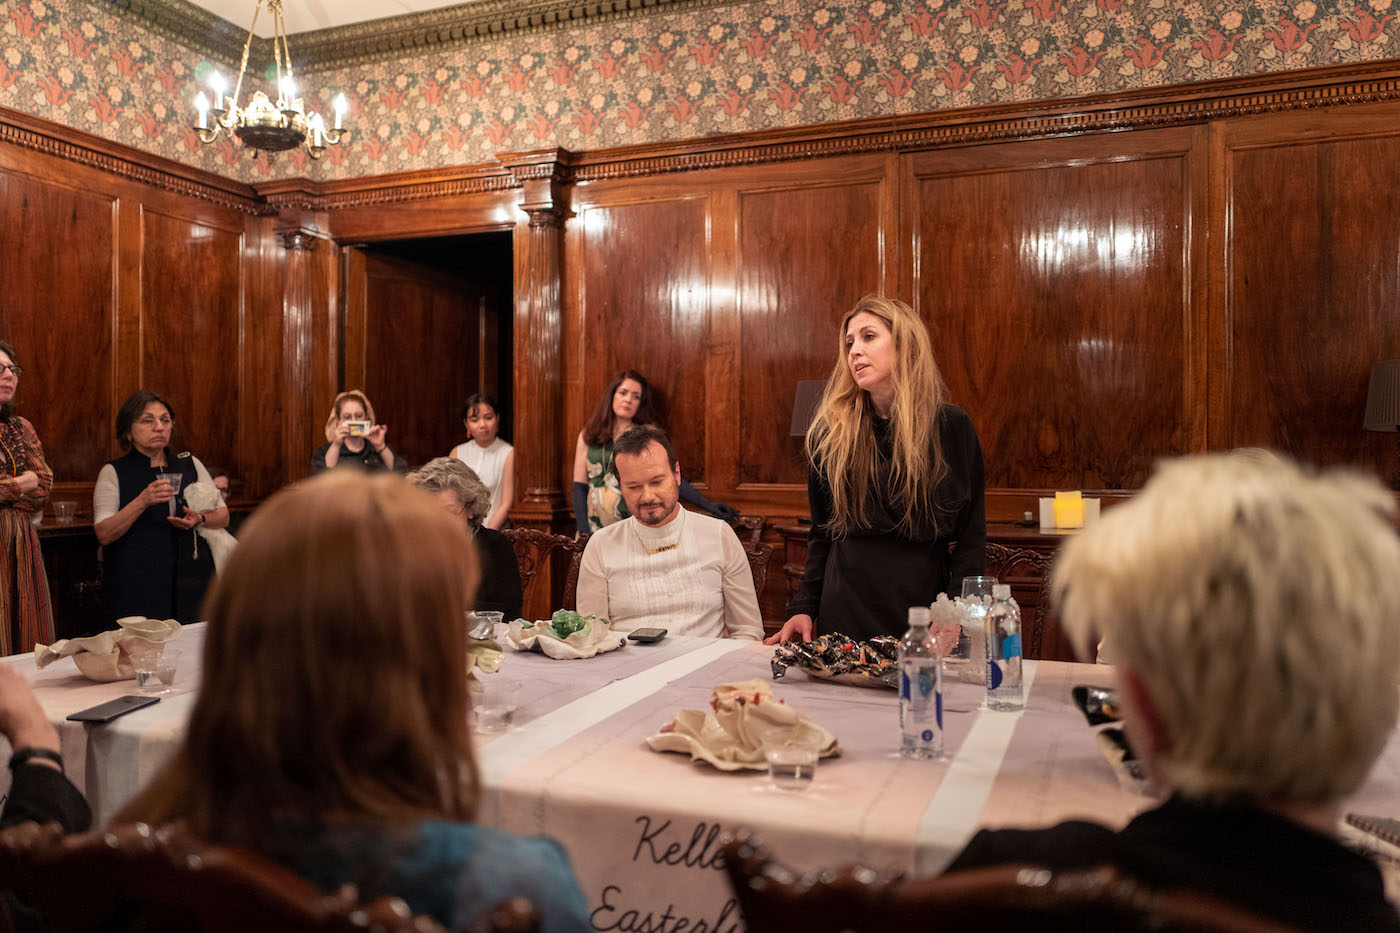 Harriet Harriss, Dean of the School of Architecture, speaking at the Mistresses of Pratt Dinner Party (photo by Armon Burton)